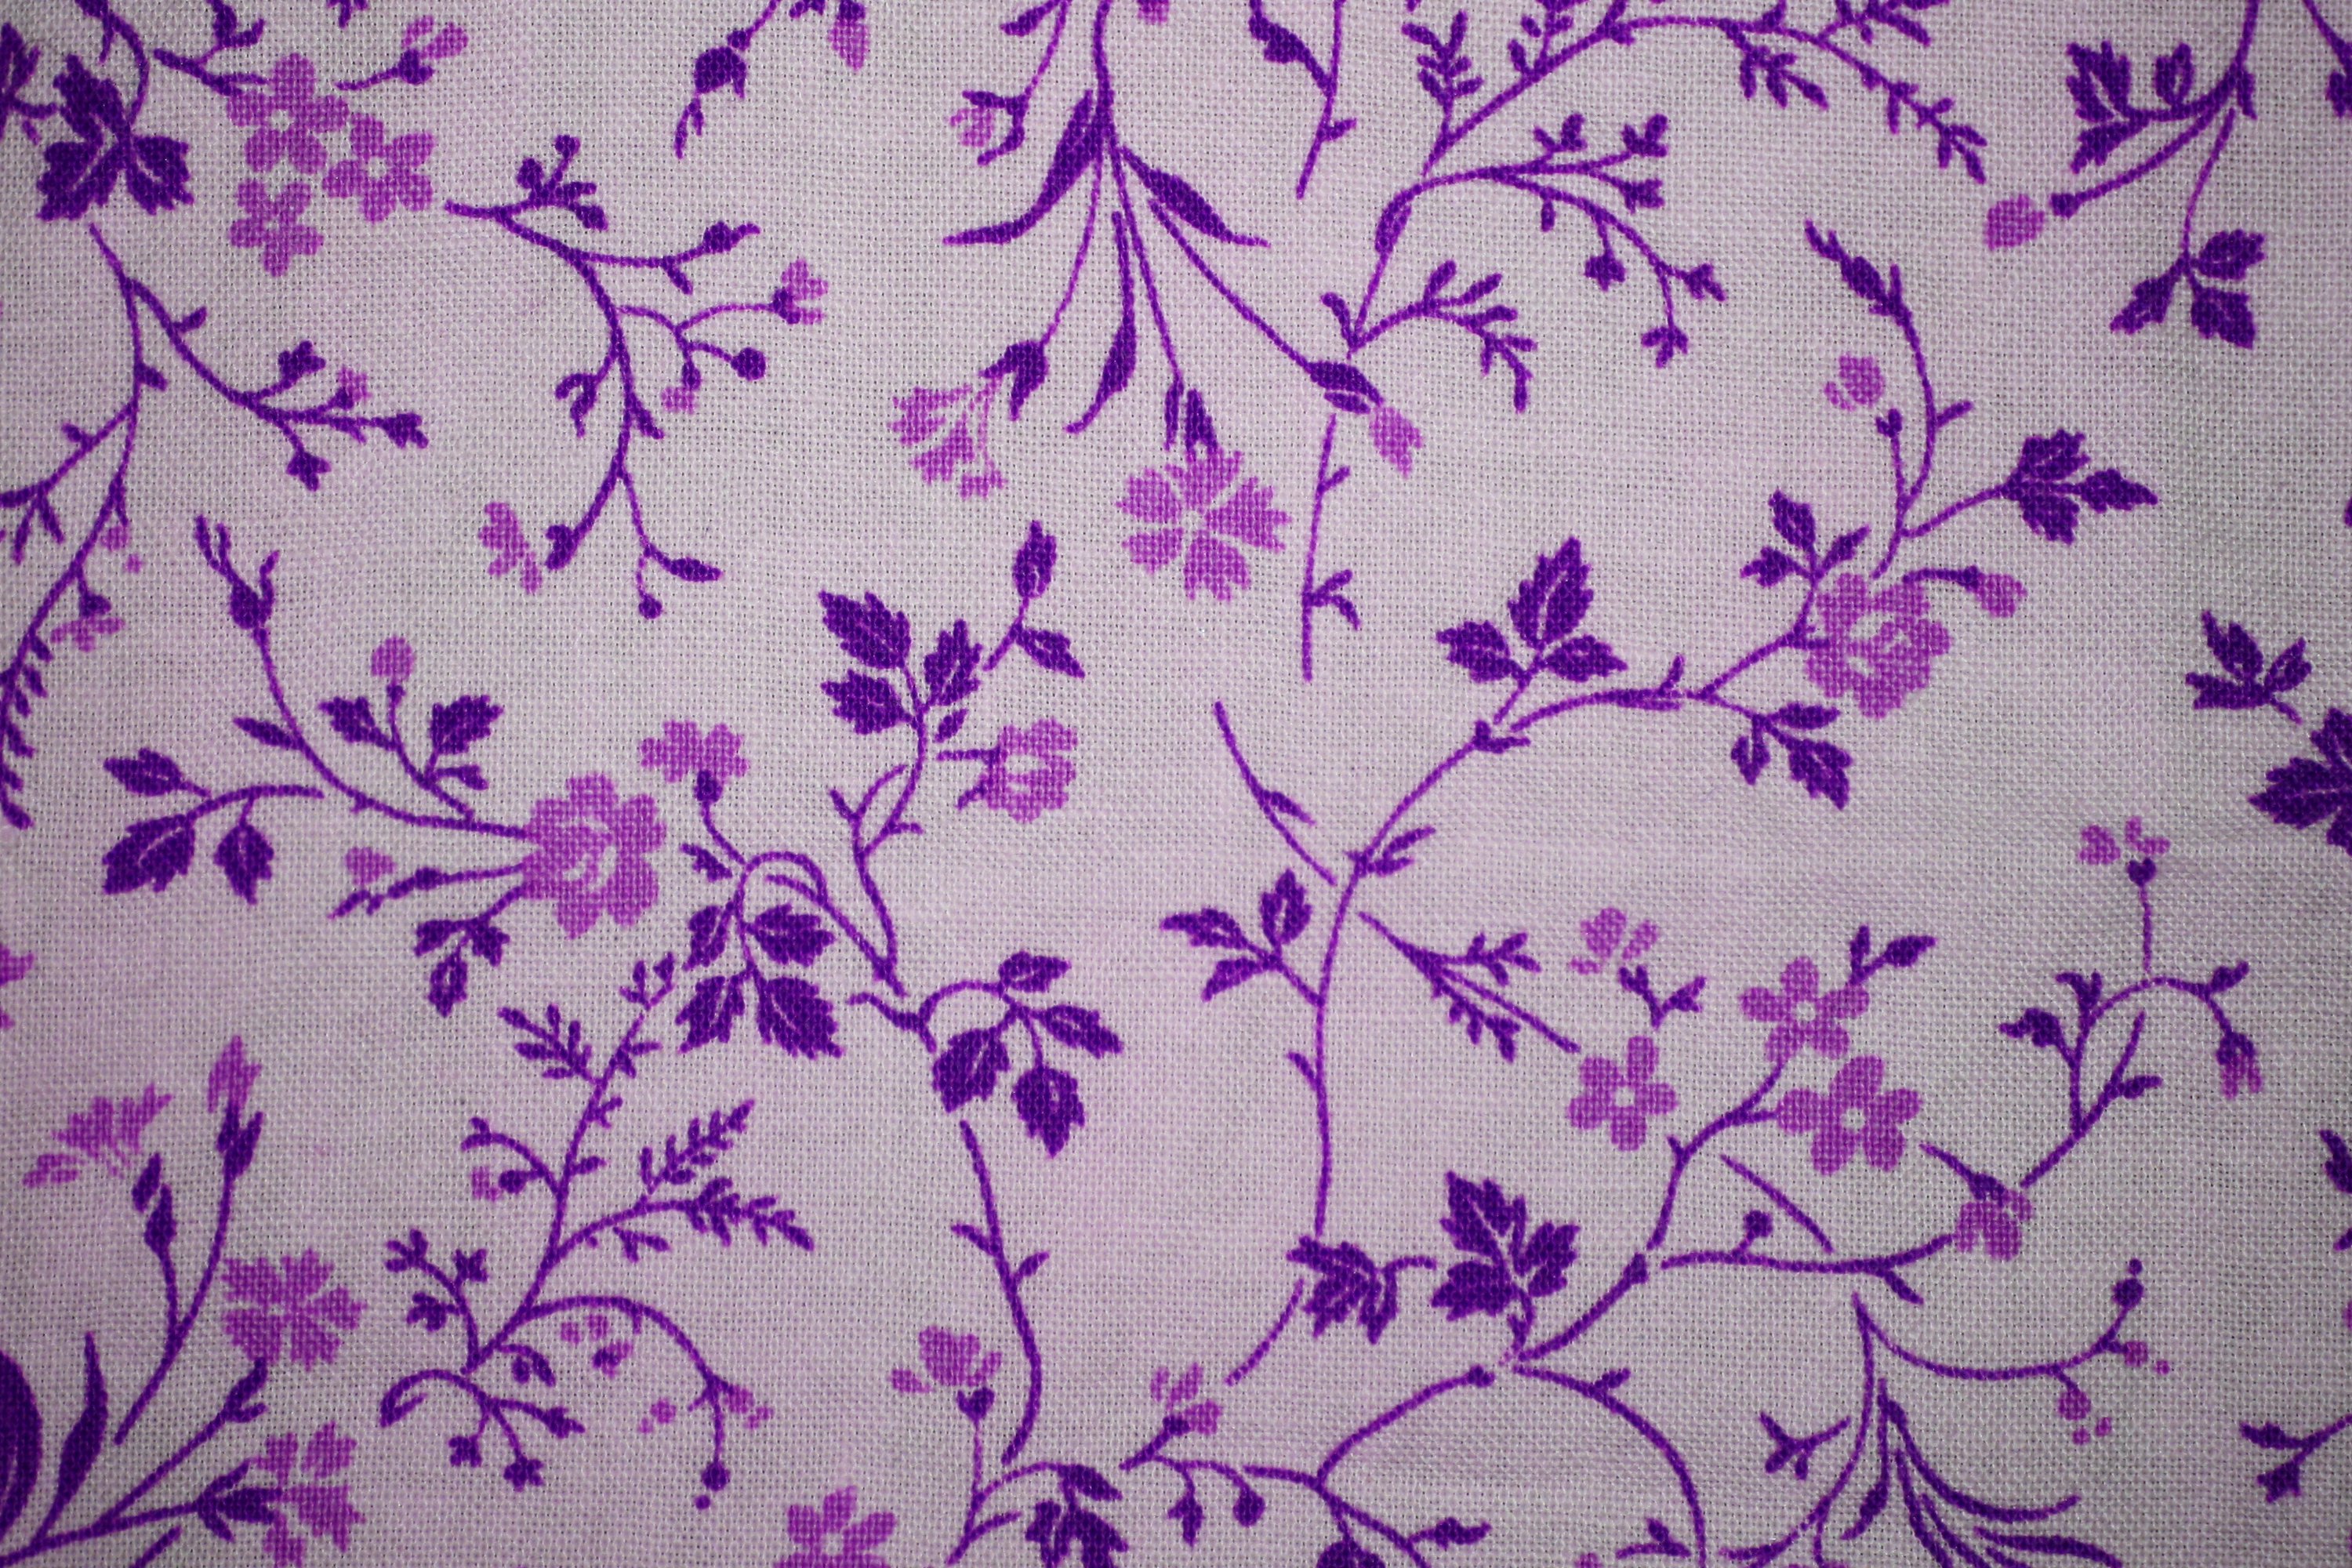 Purple on White Floral Print Fabric Texture Picture Free Photograph